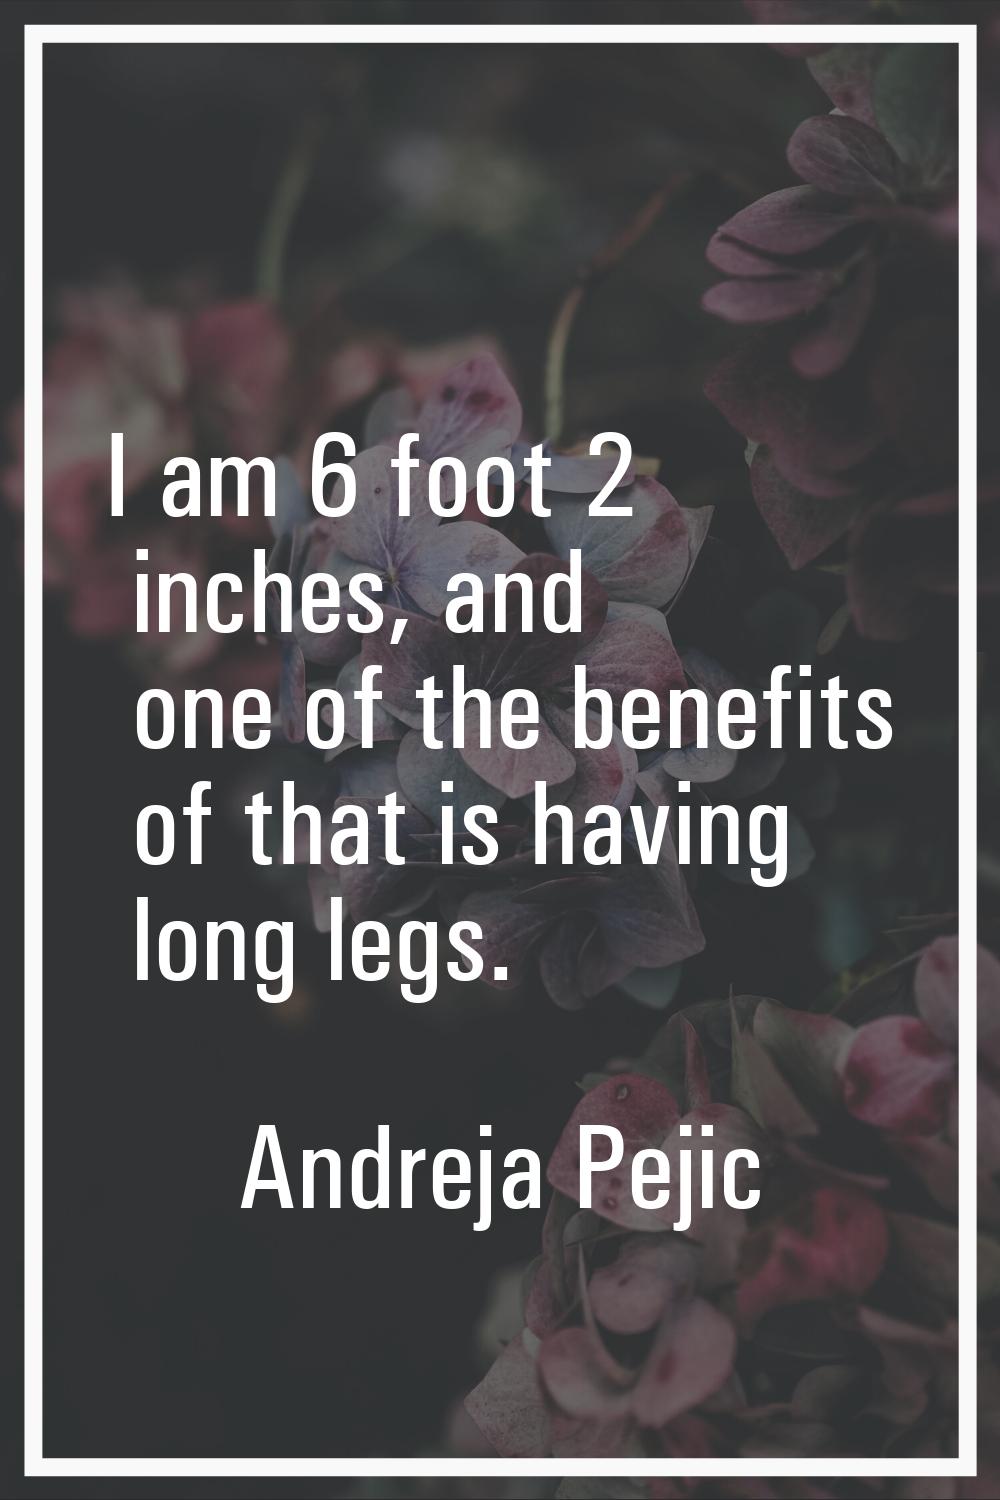 I am 6 foot 2 inches, and one of the benefits of that is having long legs.